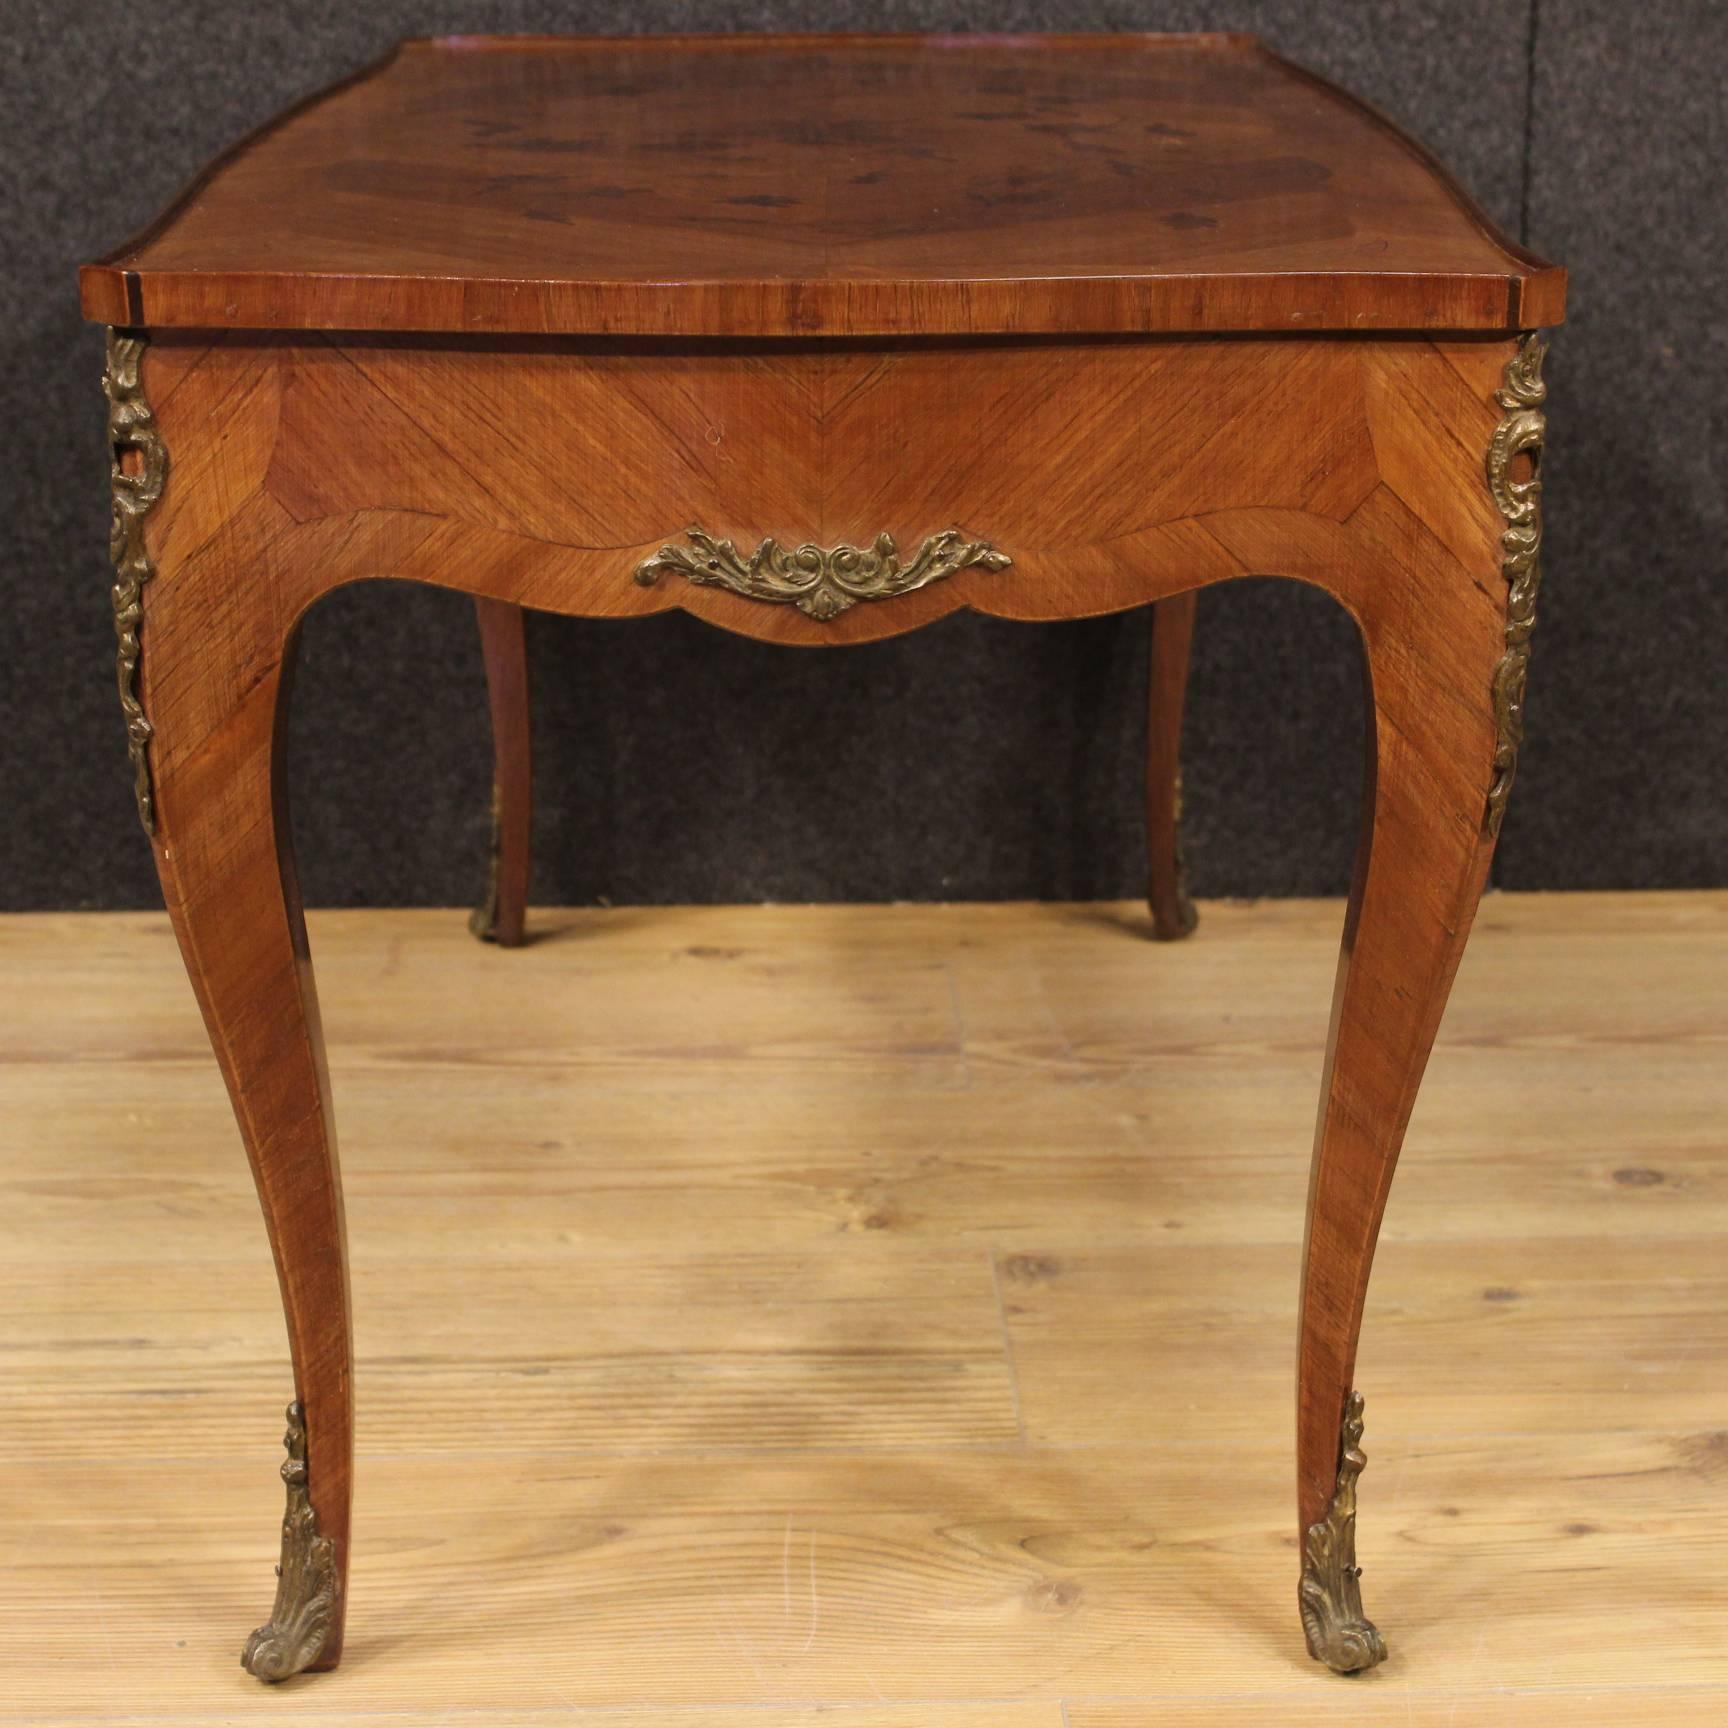 French coffee table of the 20th century. Coffee table in rosewood and palisander finely inlaid on the top floor with floral motifs. Furniture decorated with chiseled bronzes of beautiful line. Coffee table of high proportion, in good condition, with